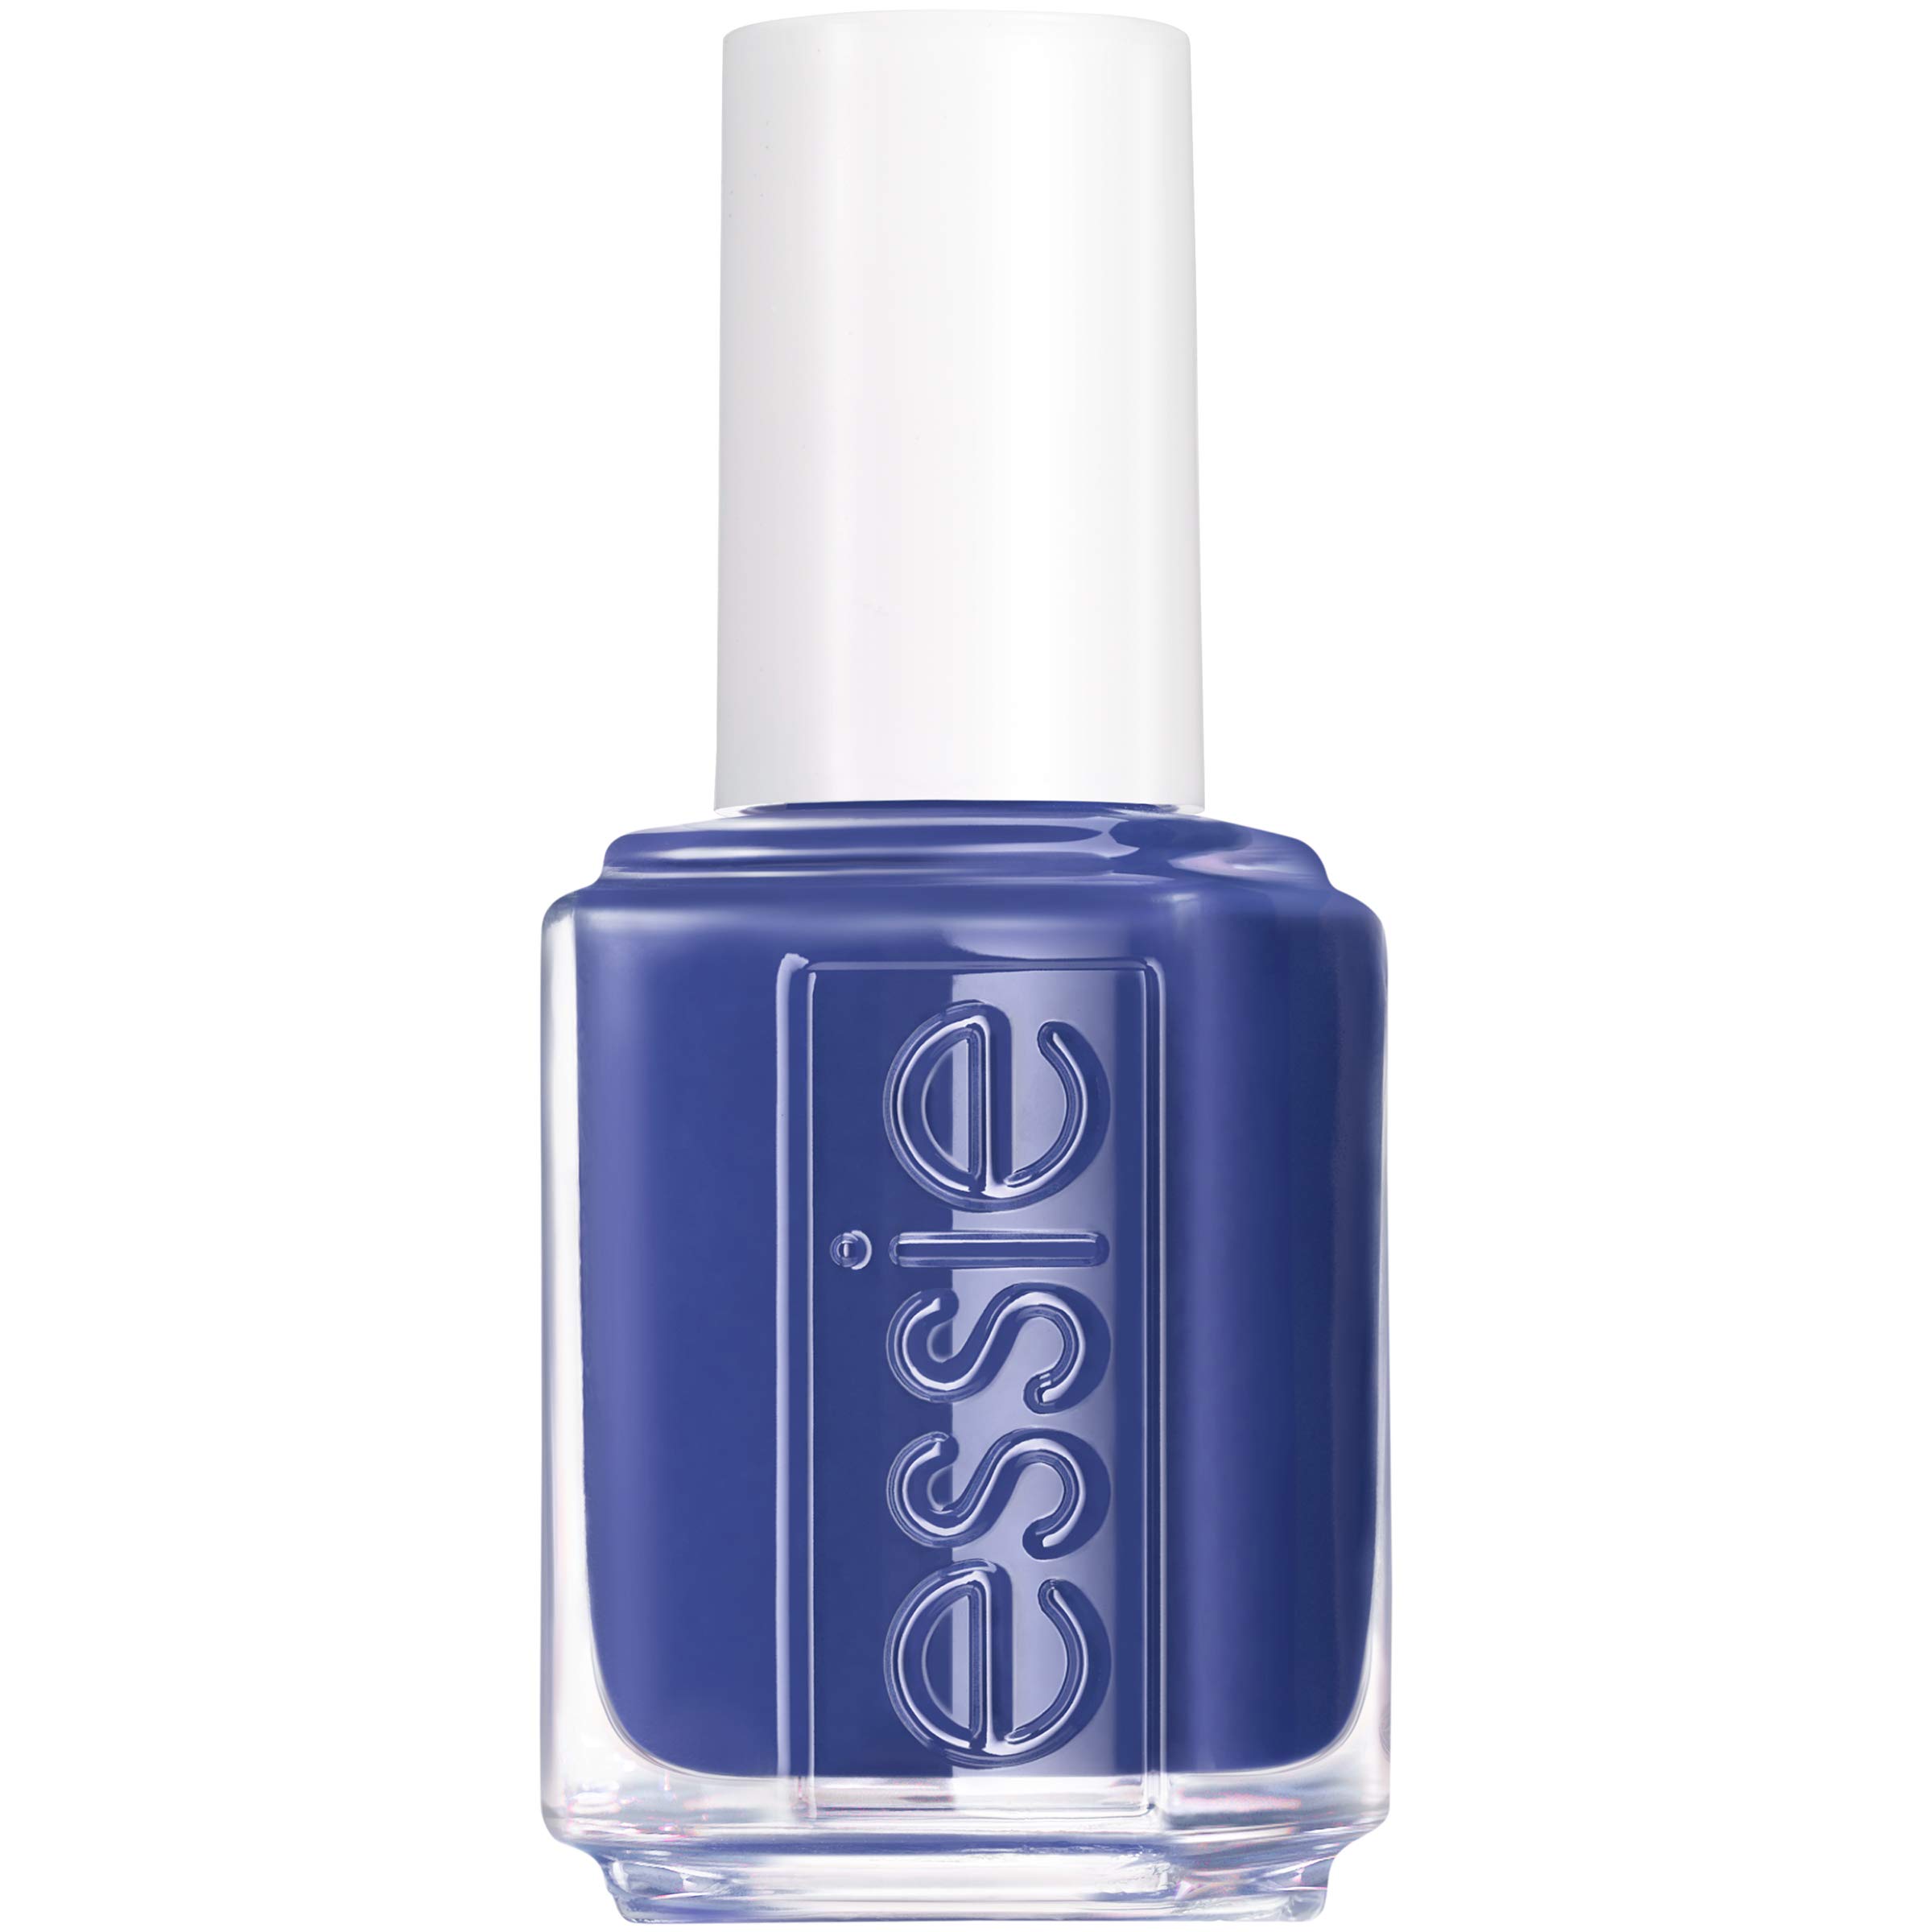 Buy Clothing Optional: essie Original Nail Polish, Wild Nudes Collections,  497 Clothing Optional 13.5 ml Online at Low Prices in India - Amazon.in